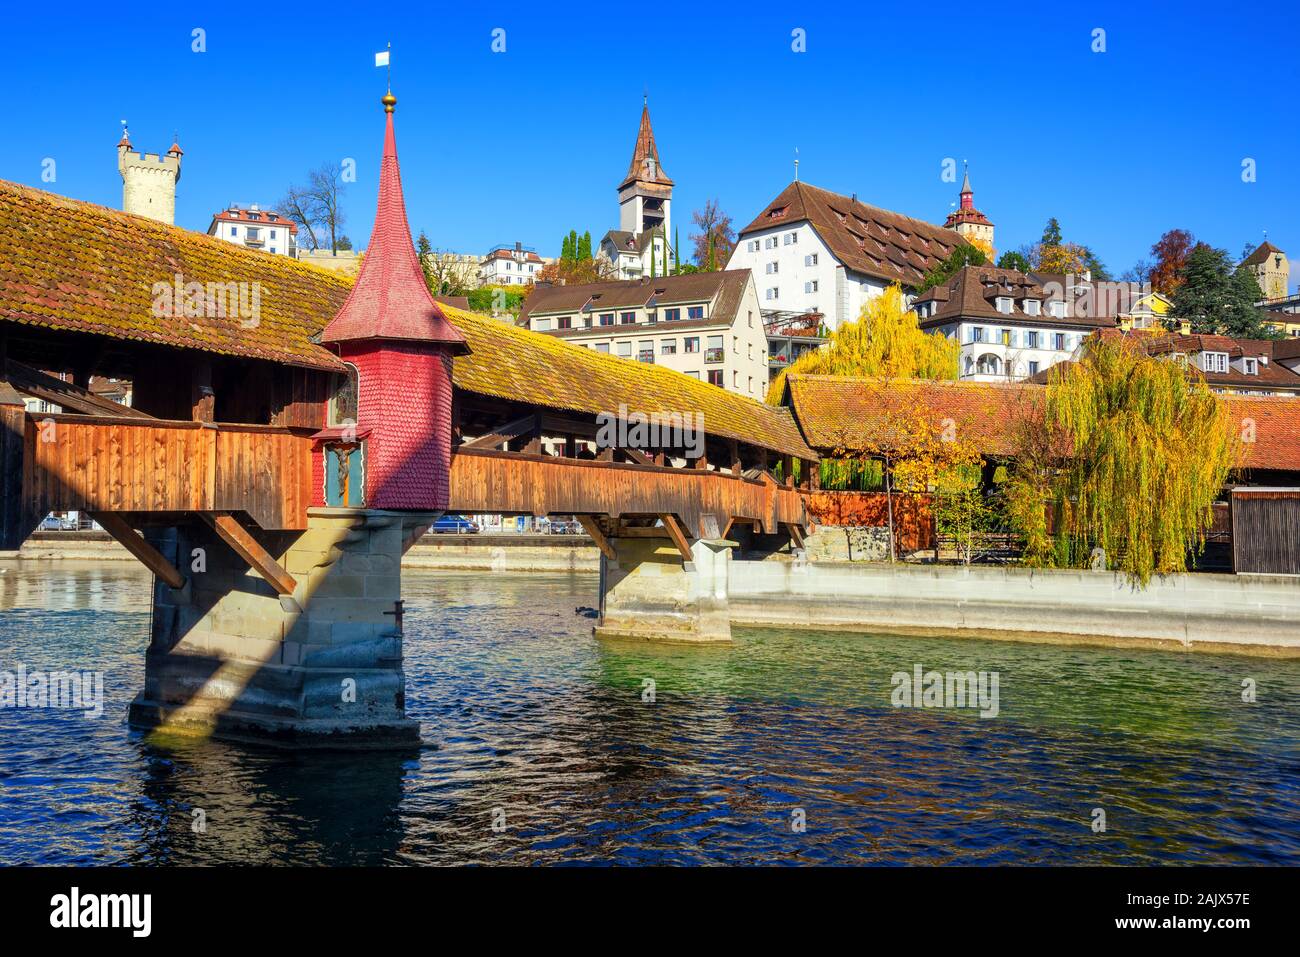 Lucerne city, view of historical wooden Spreuer bridge and the towers of medieval Old town walls, Switzerland Stock Photo